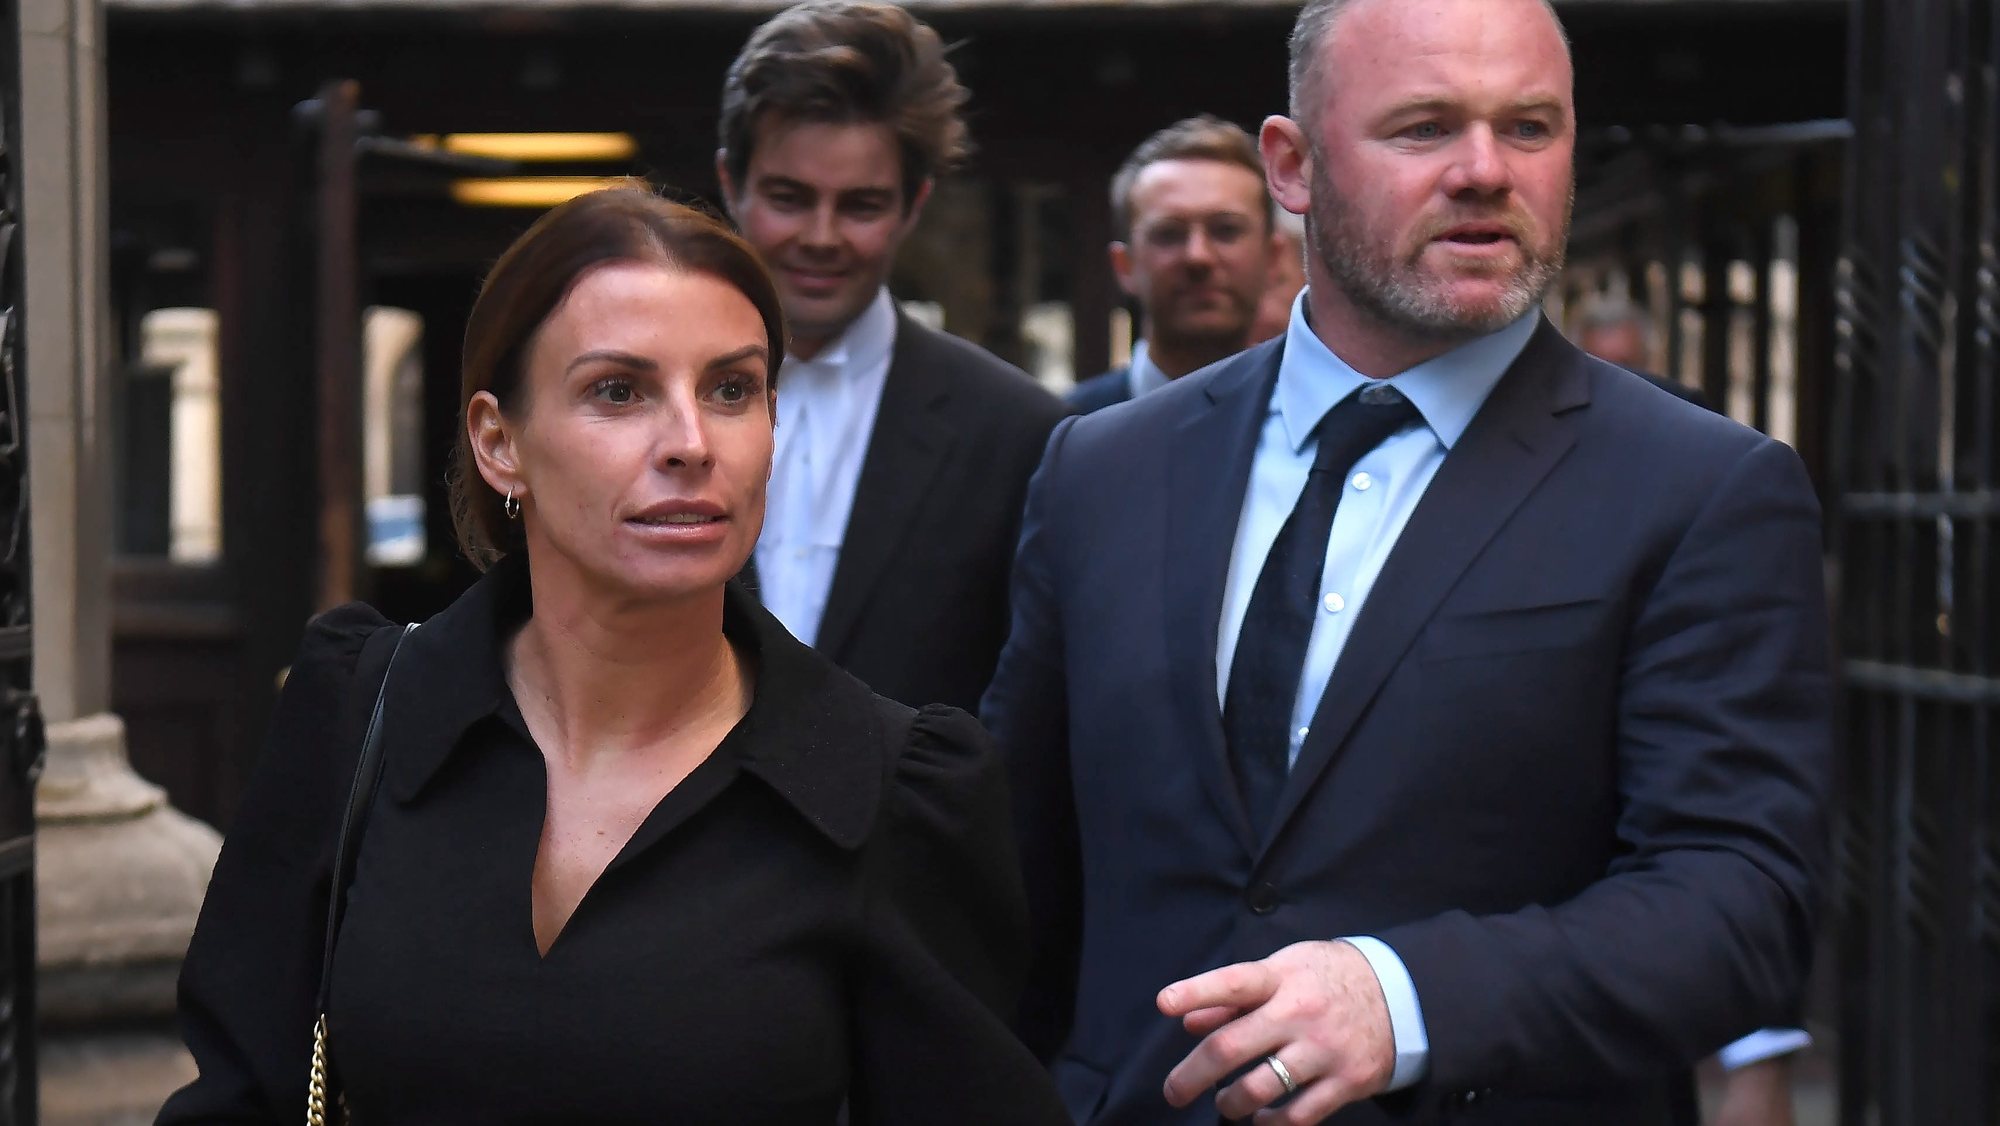 epa09953229 Coleen Rooney (L) and her soccer manager husband Wayne Rooney (R) depart the Royal Courts of Justice in London, Britain, 17 May 2022.  Footballers&#039; wives Coleen Rooney and Rebekah Vardy are facing each other in the High Court at the opening of their &#039;Wagatha Christie&#039; libel trial over a social media post. The case centres on Twitter and Instagram posts from October 2019 where Coleen Rooney alleged that someone had leaked stories to The Sun tabloid.  EPA/NEIL HALL